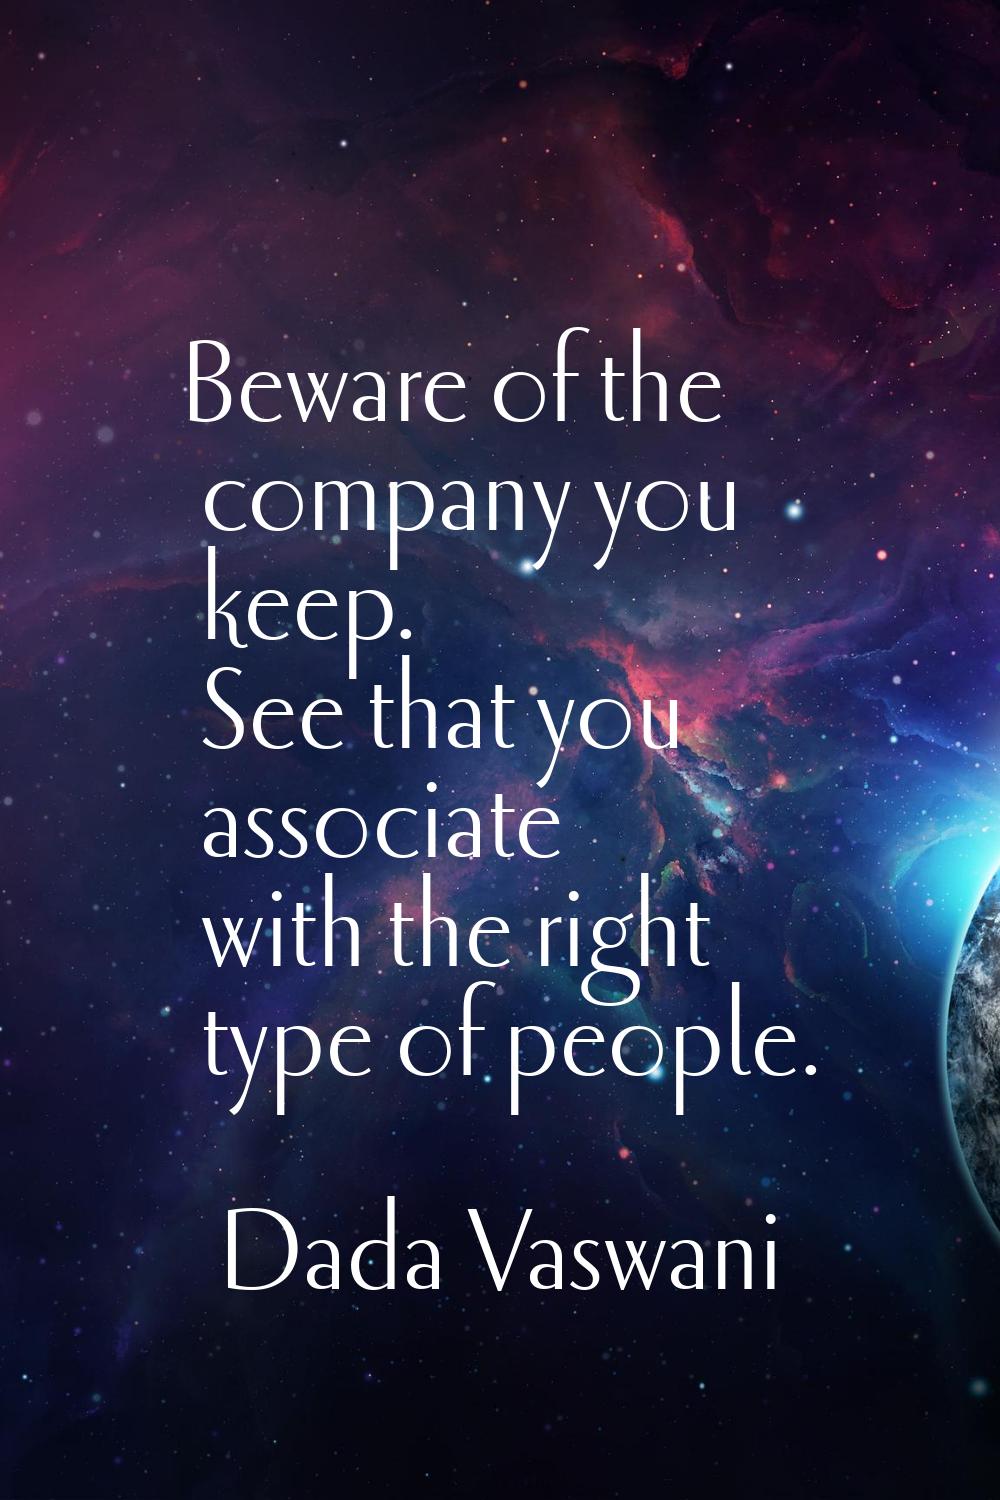 Beware of the company you keep. See that you associate with the right type of people.